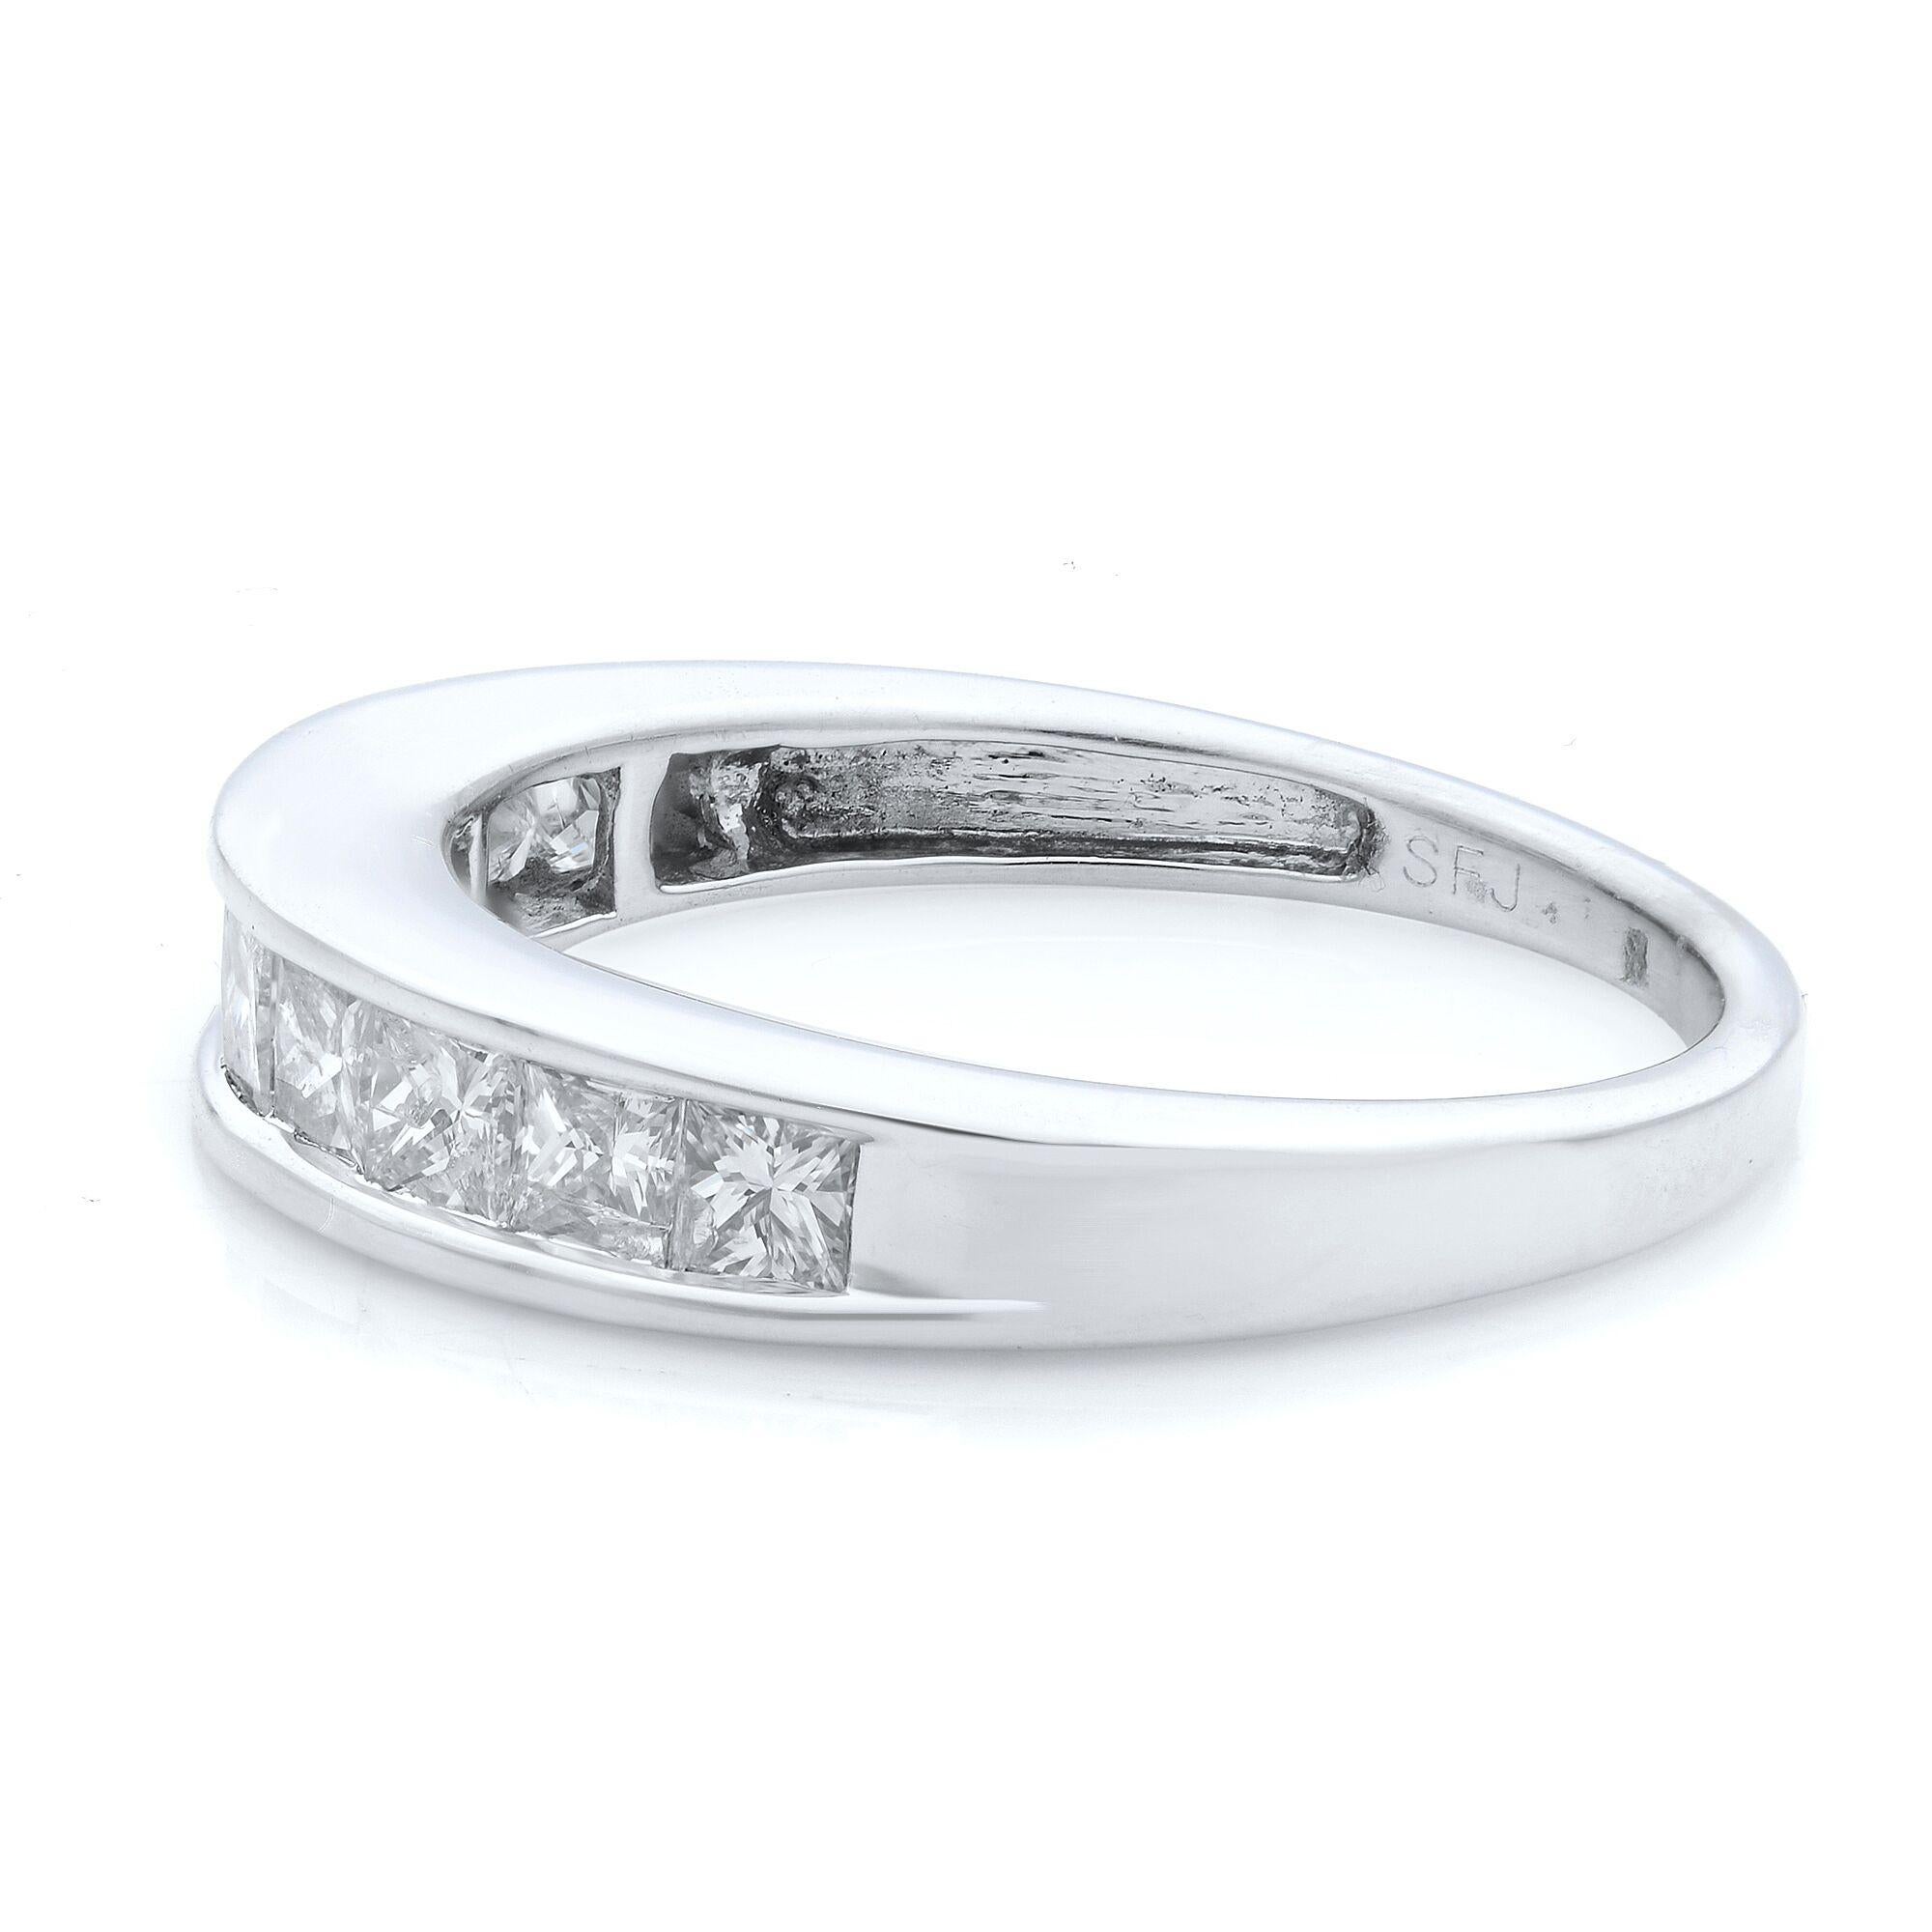 This classic 14k white gold wedding band is channel set half way around with 10 princess cut diamonds. Total carat weight is approximately 1.00 carat. The diamonds grade is J color and SI1 in clarity. Ring size 7.25. Comes in our presentation box.